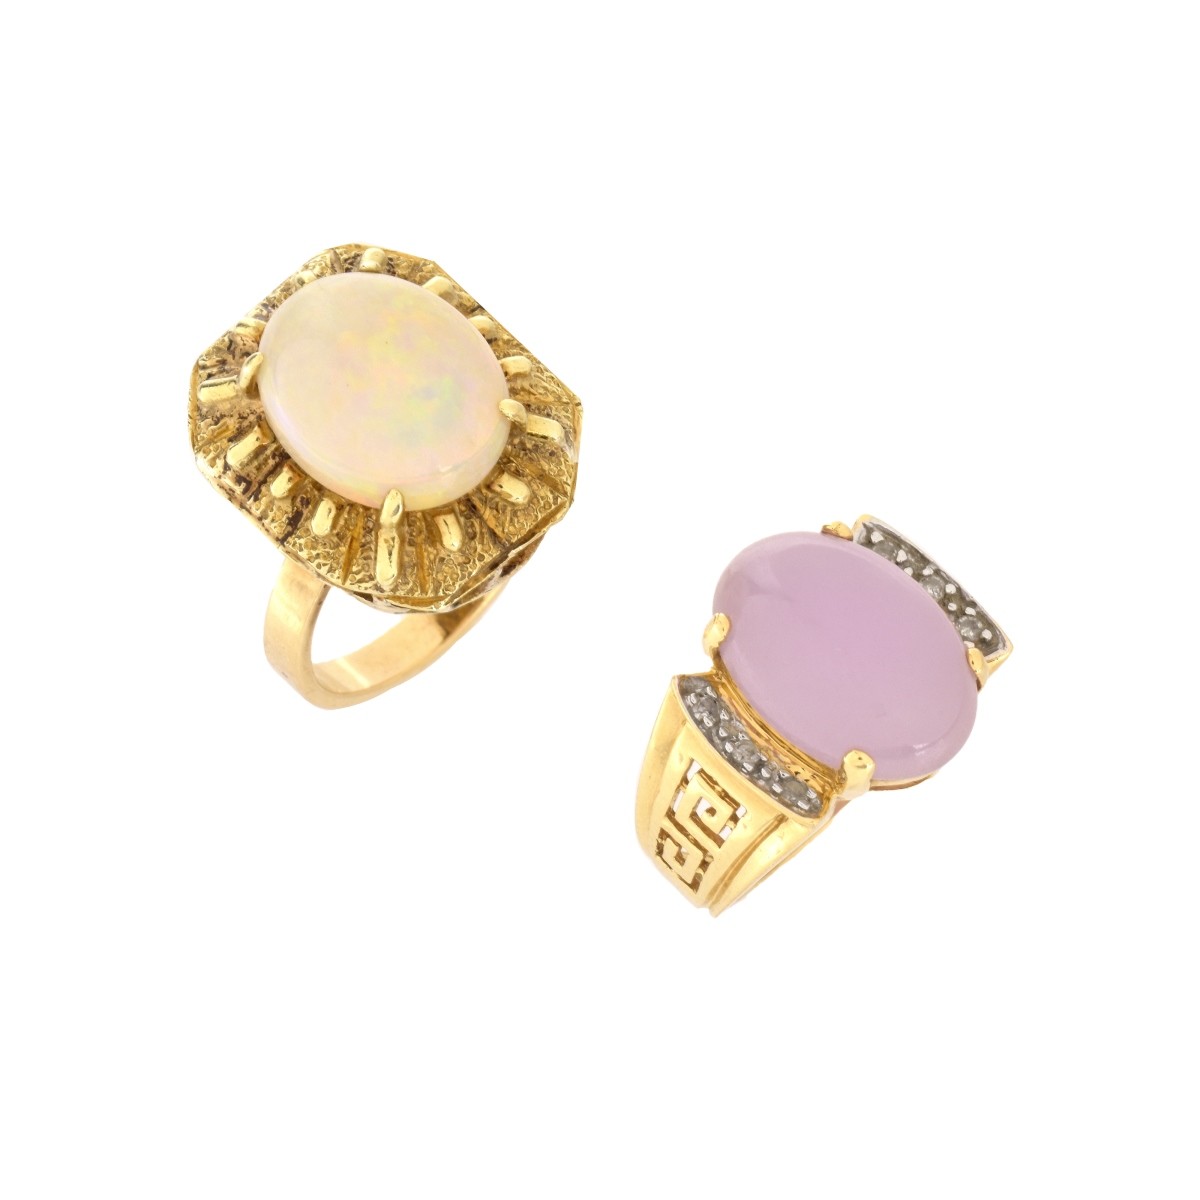 Two 14K and Gemstone Rings